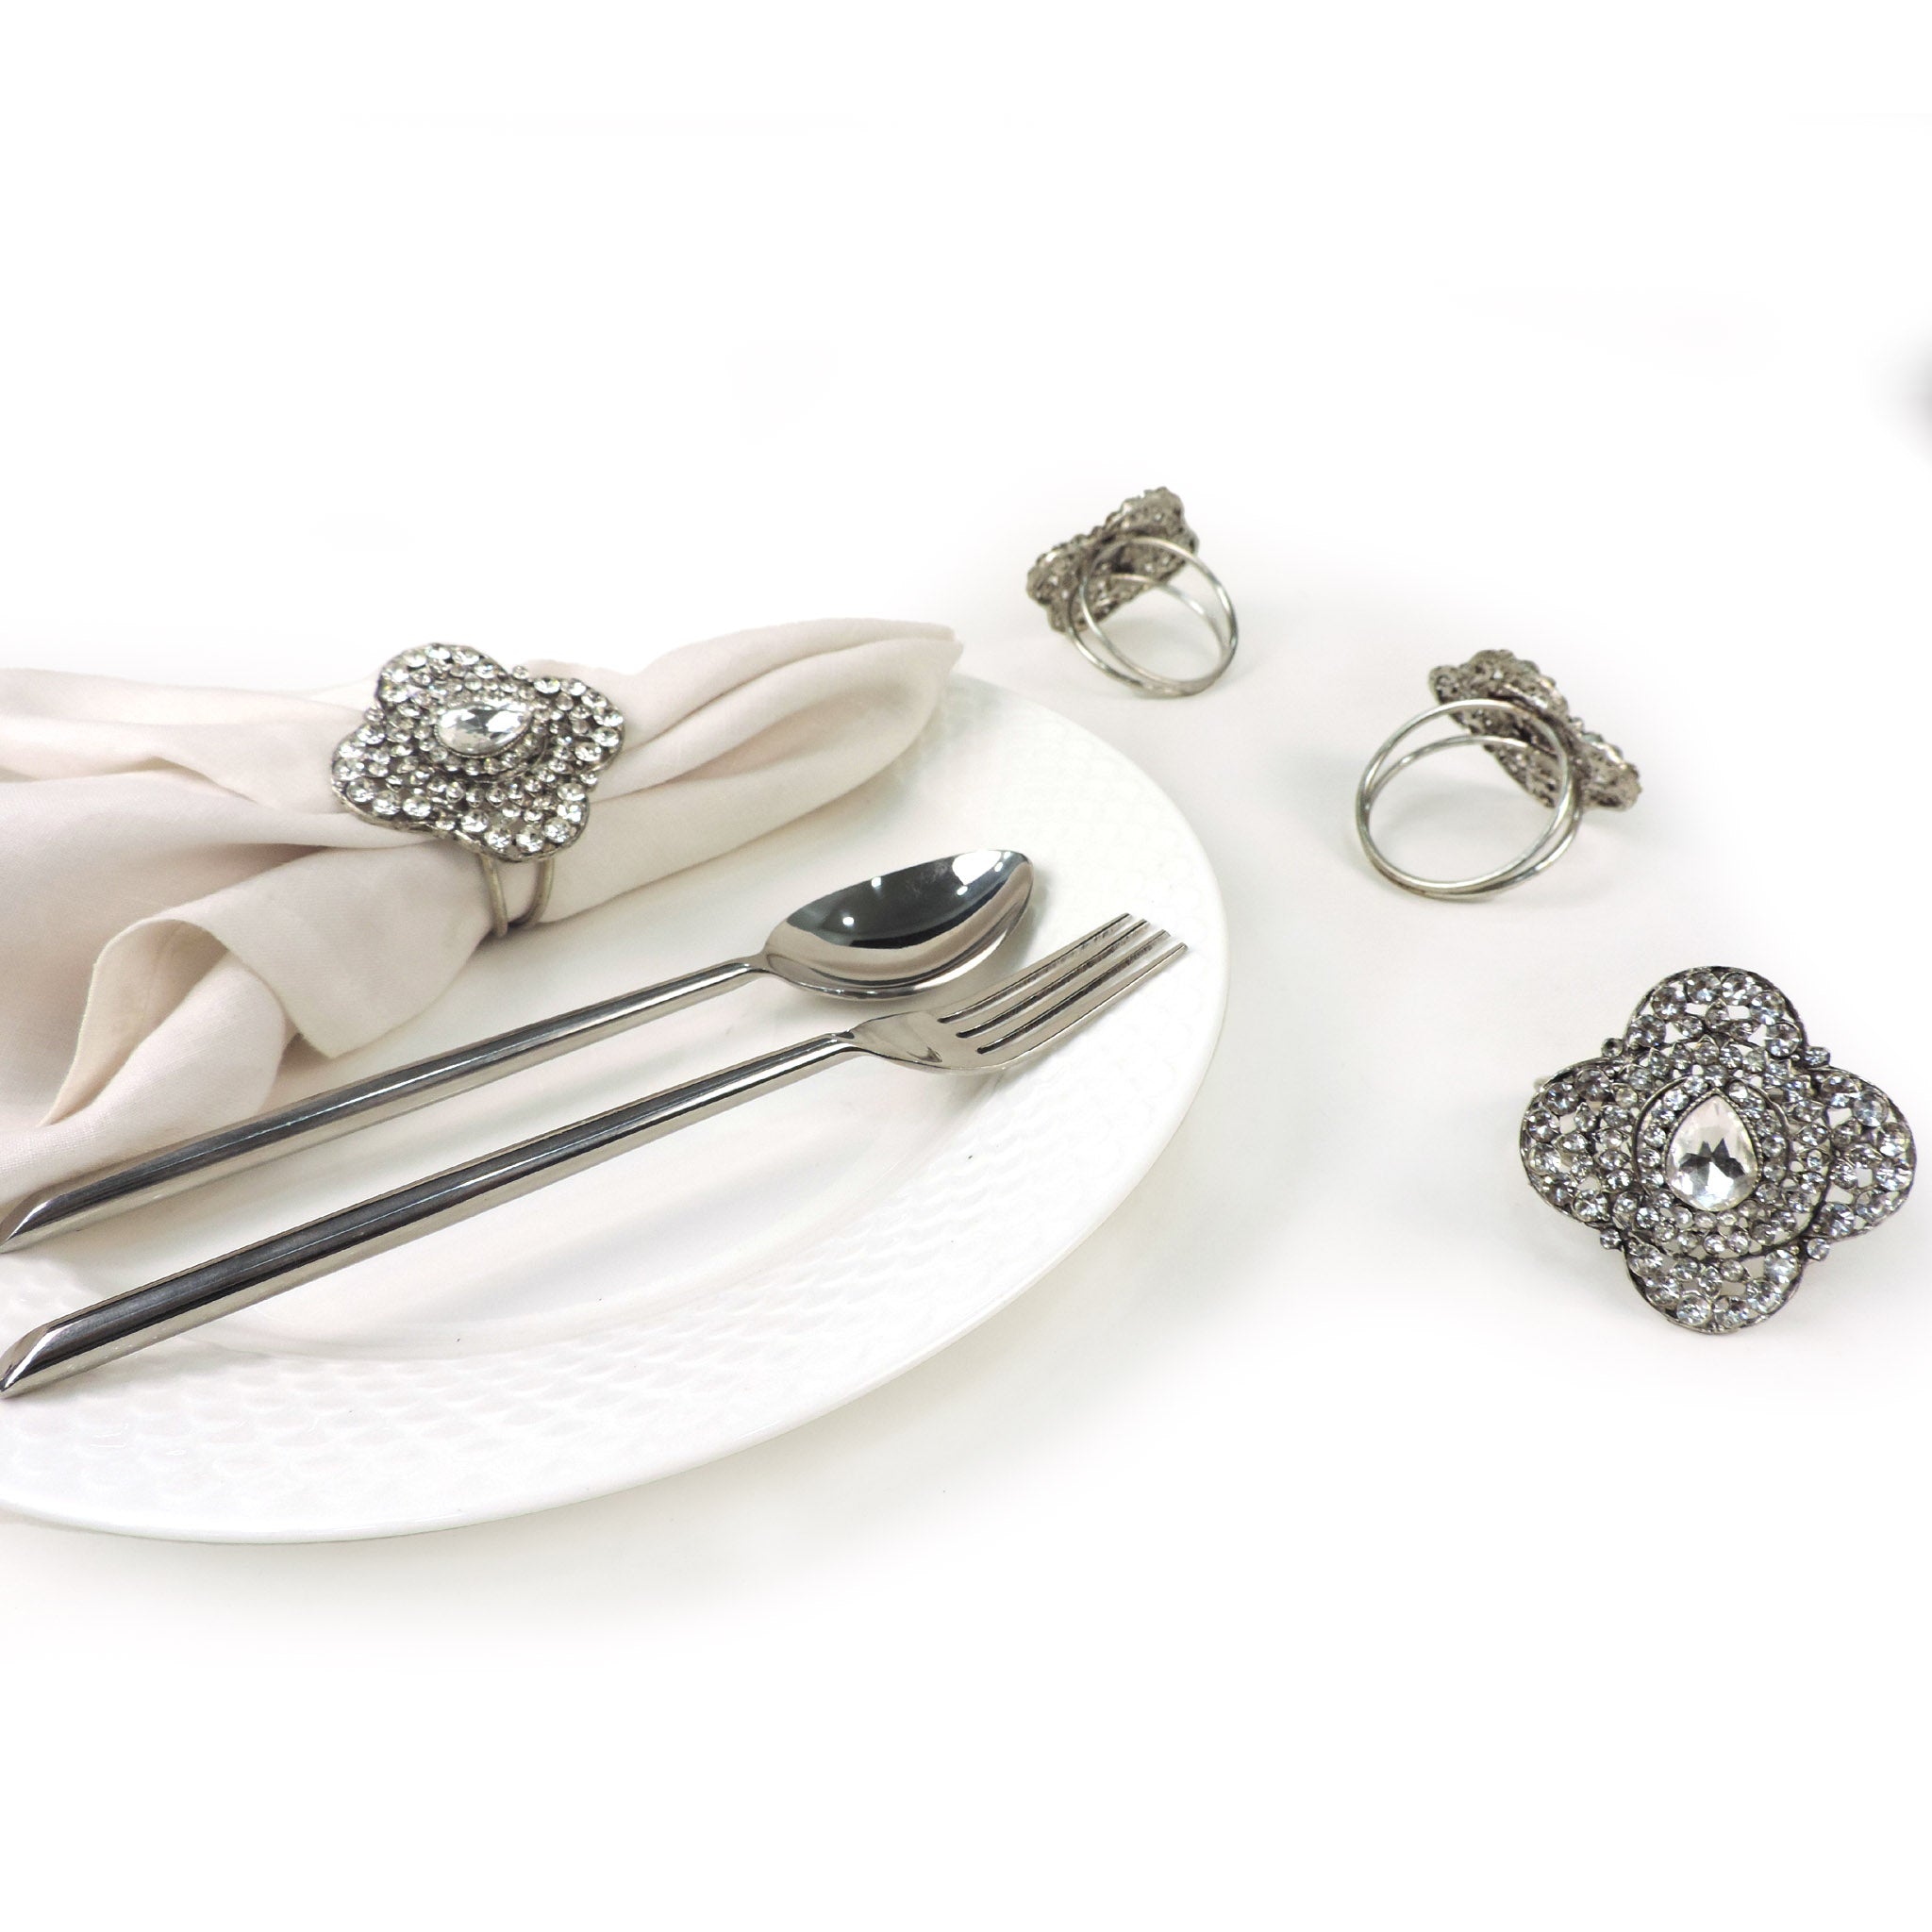 Bold & Beautiful Jeweled Napkin Ring<br>Color: Silver<br>Size: 2.20"x2"<br>Set of 4